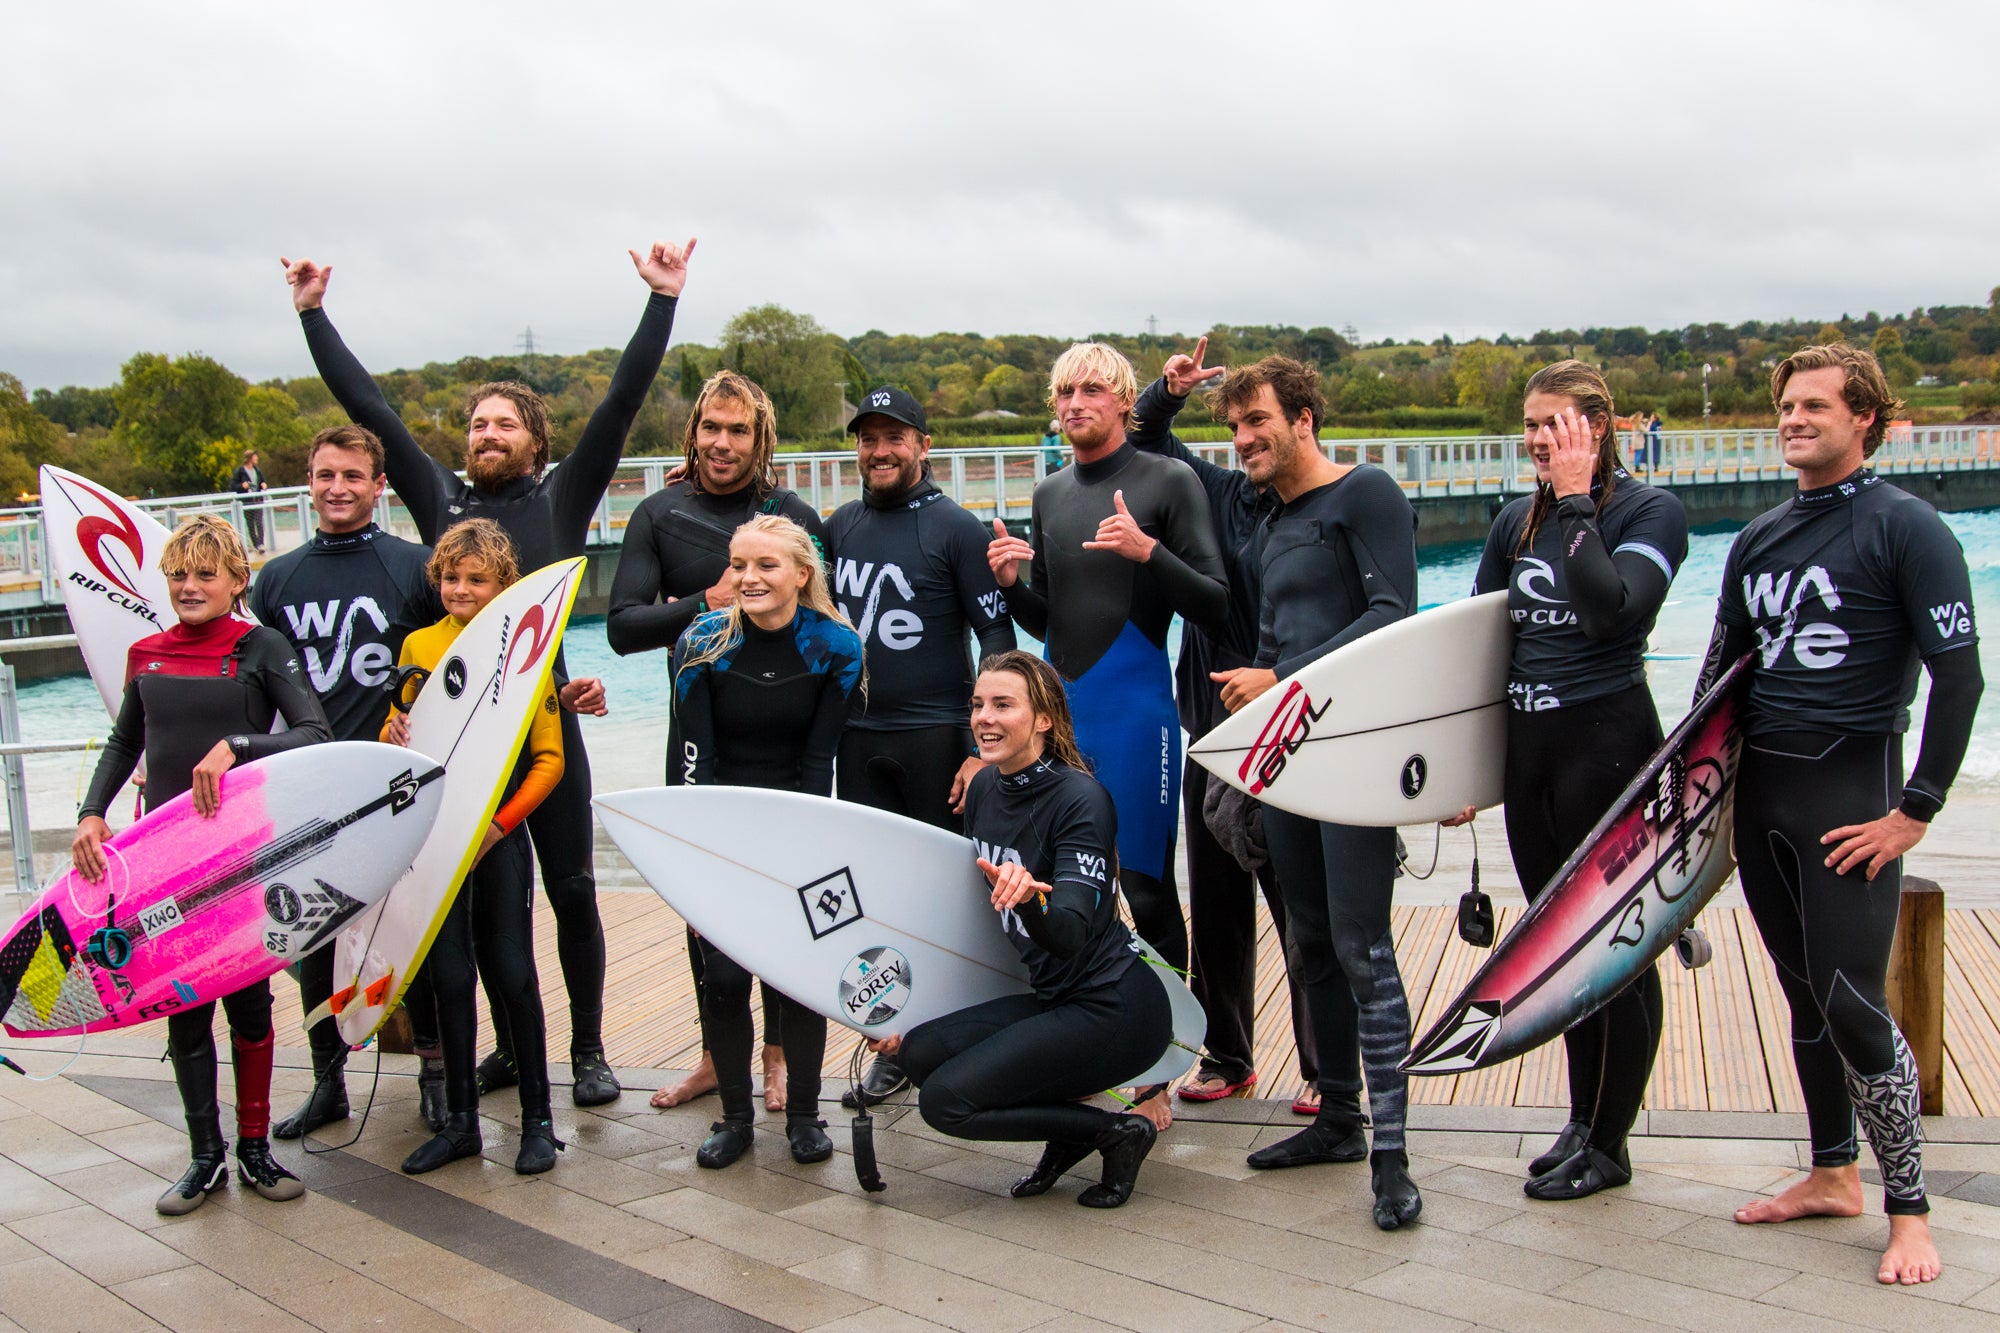 Pro Surfers at the Launch of The Wave Bristol